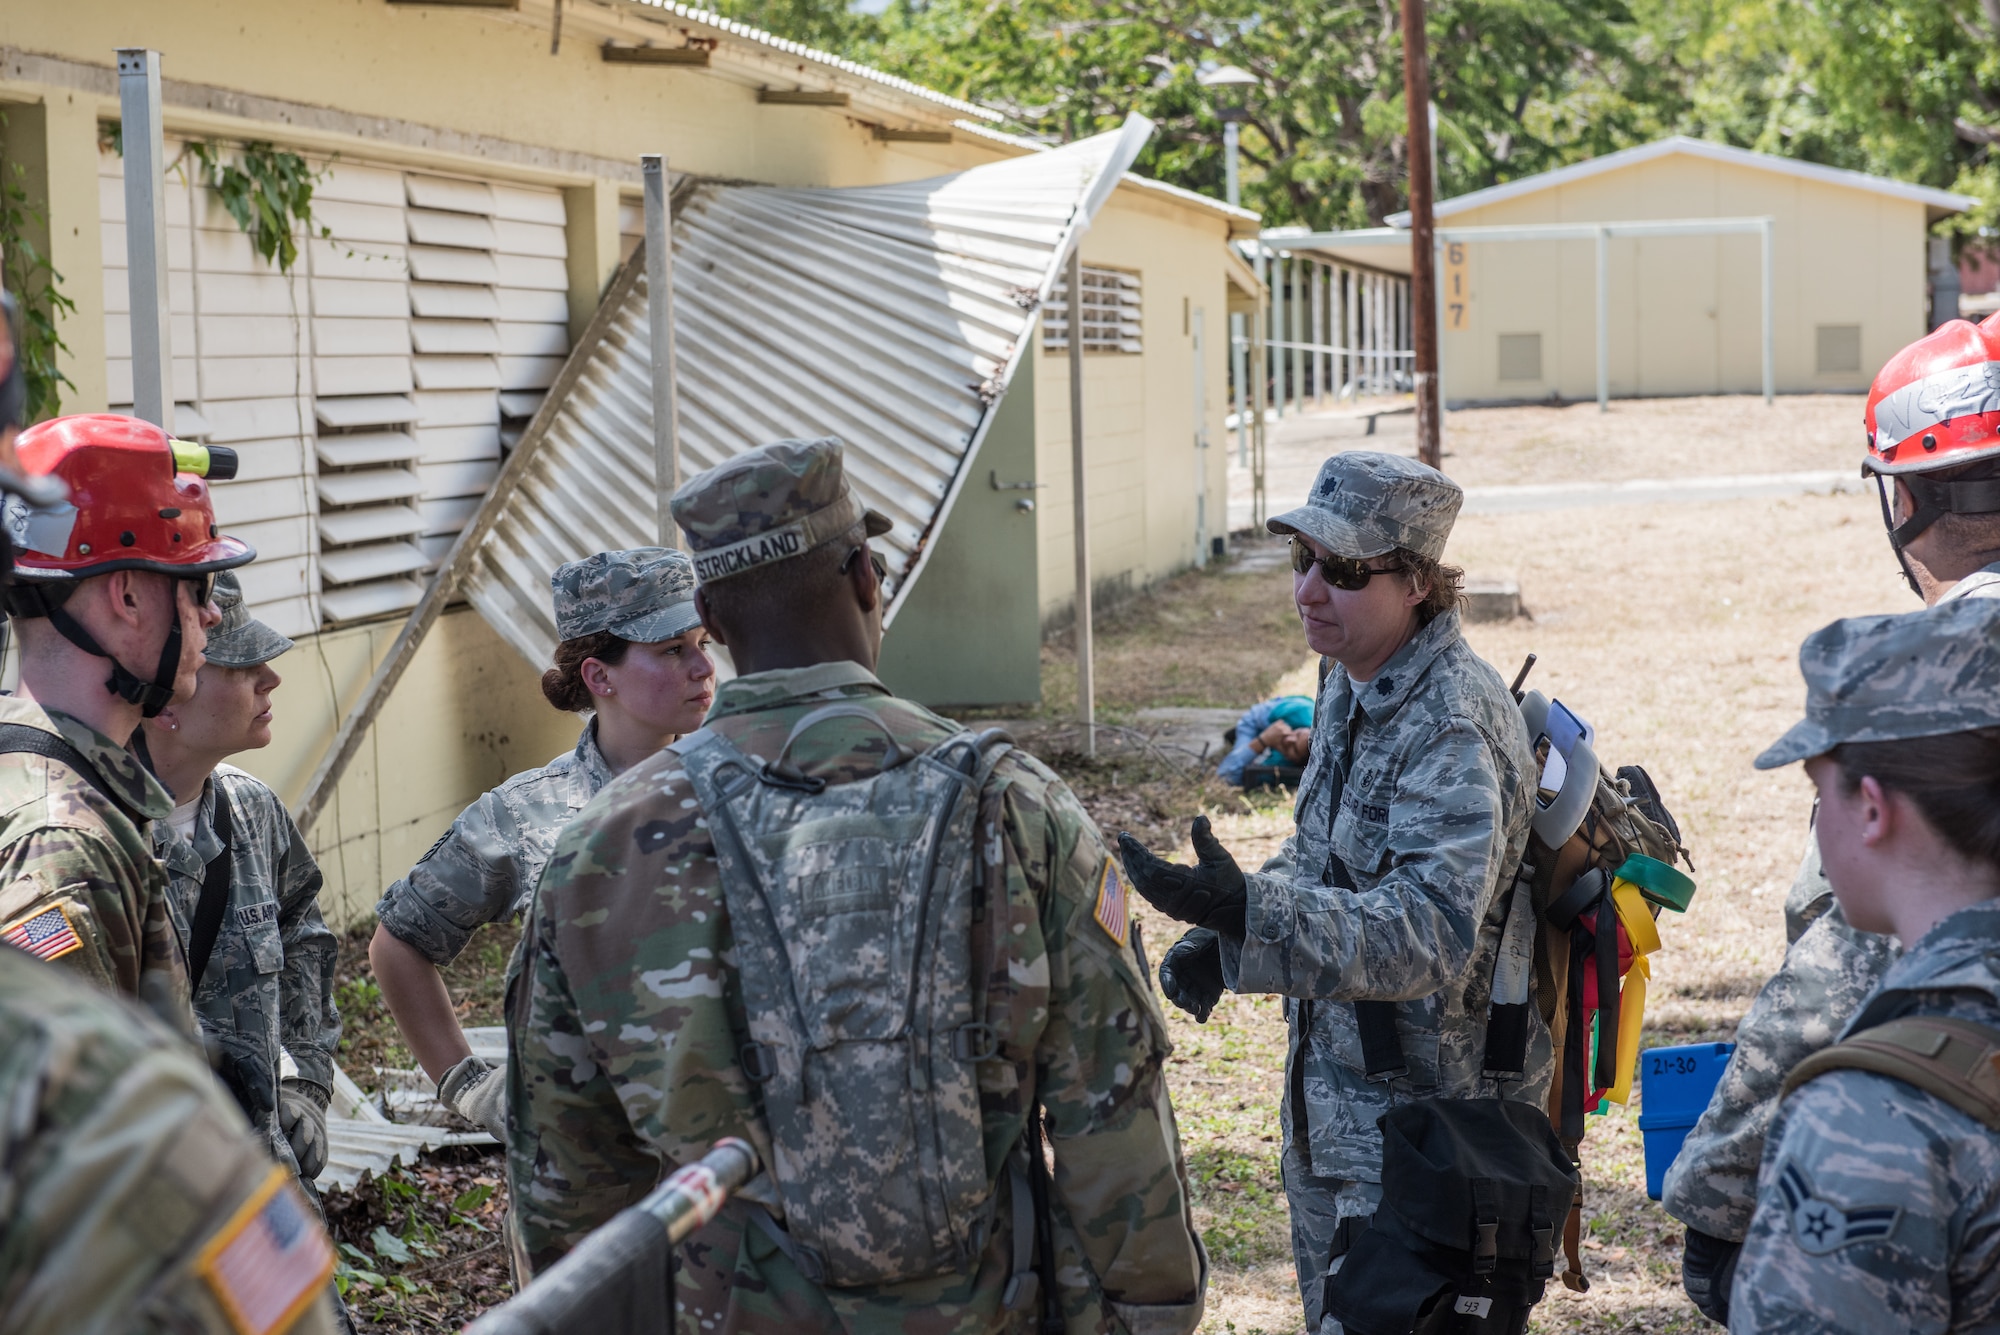 U.S. Airmen and Soldiers from the 3rd Chemical, Biological, Radiological, Nuclear Task Force, Pennsylvania National Guard, discuss aspects of their training scenario during the exercise Vigilant Guard.